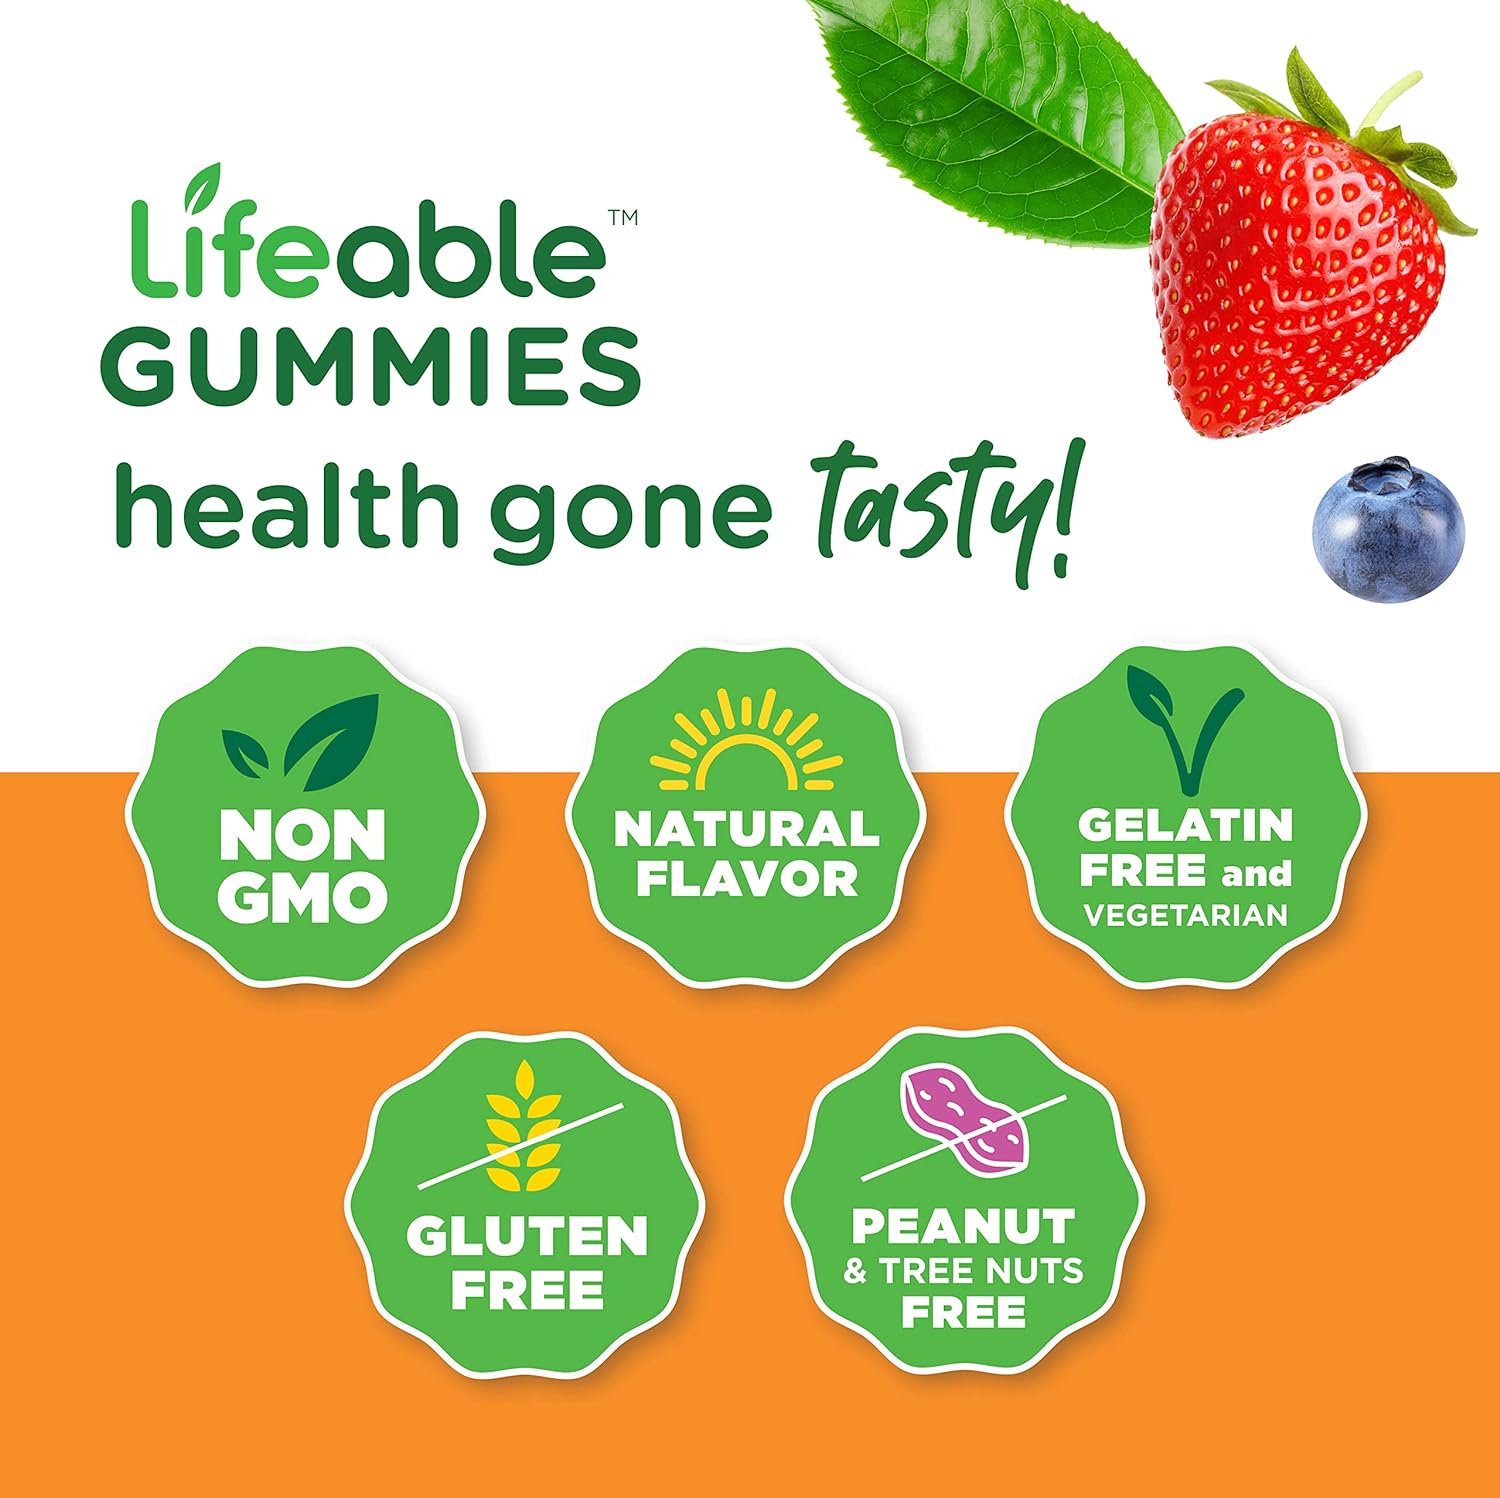 Lifeable Prebiotic Fiber Supplement Gummies 5g - Great Tasting Natural Flavored Gummy - Gluten Free, Vegetarian, GMO-Free Chewable - 90 Gummies - 45 Doses : Health & Household